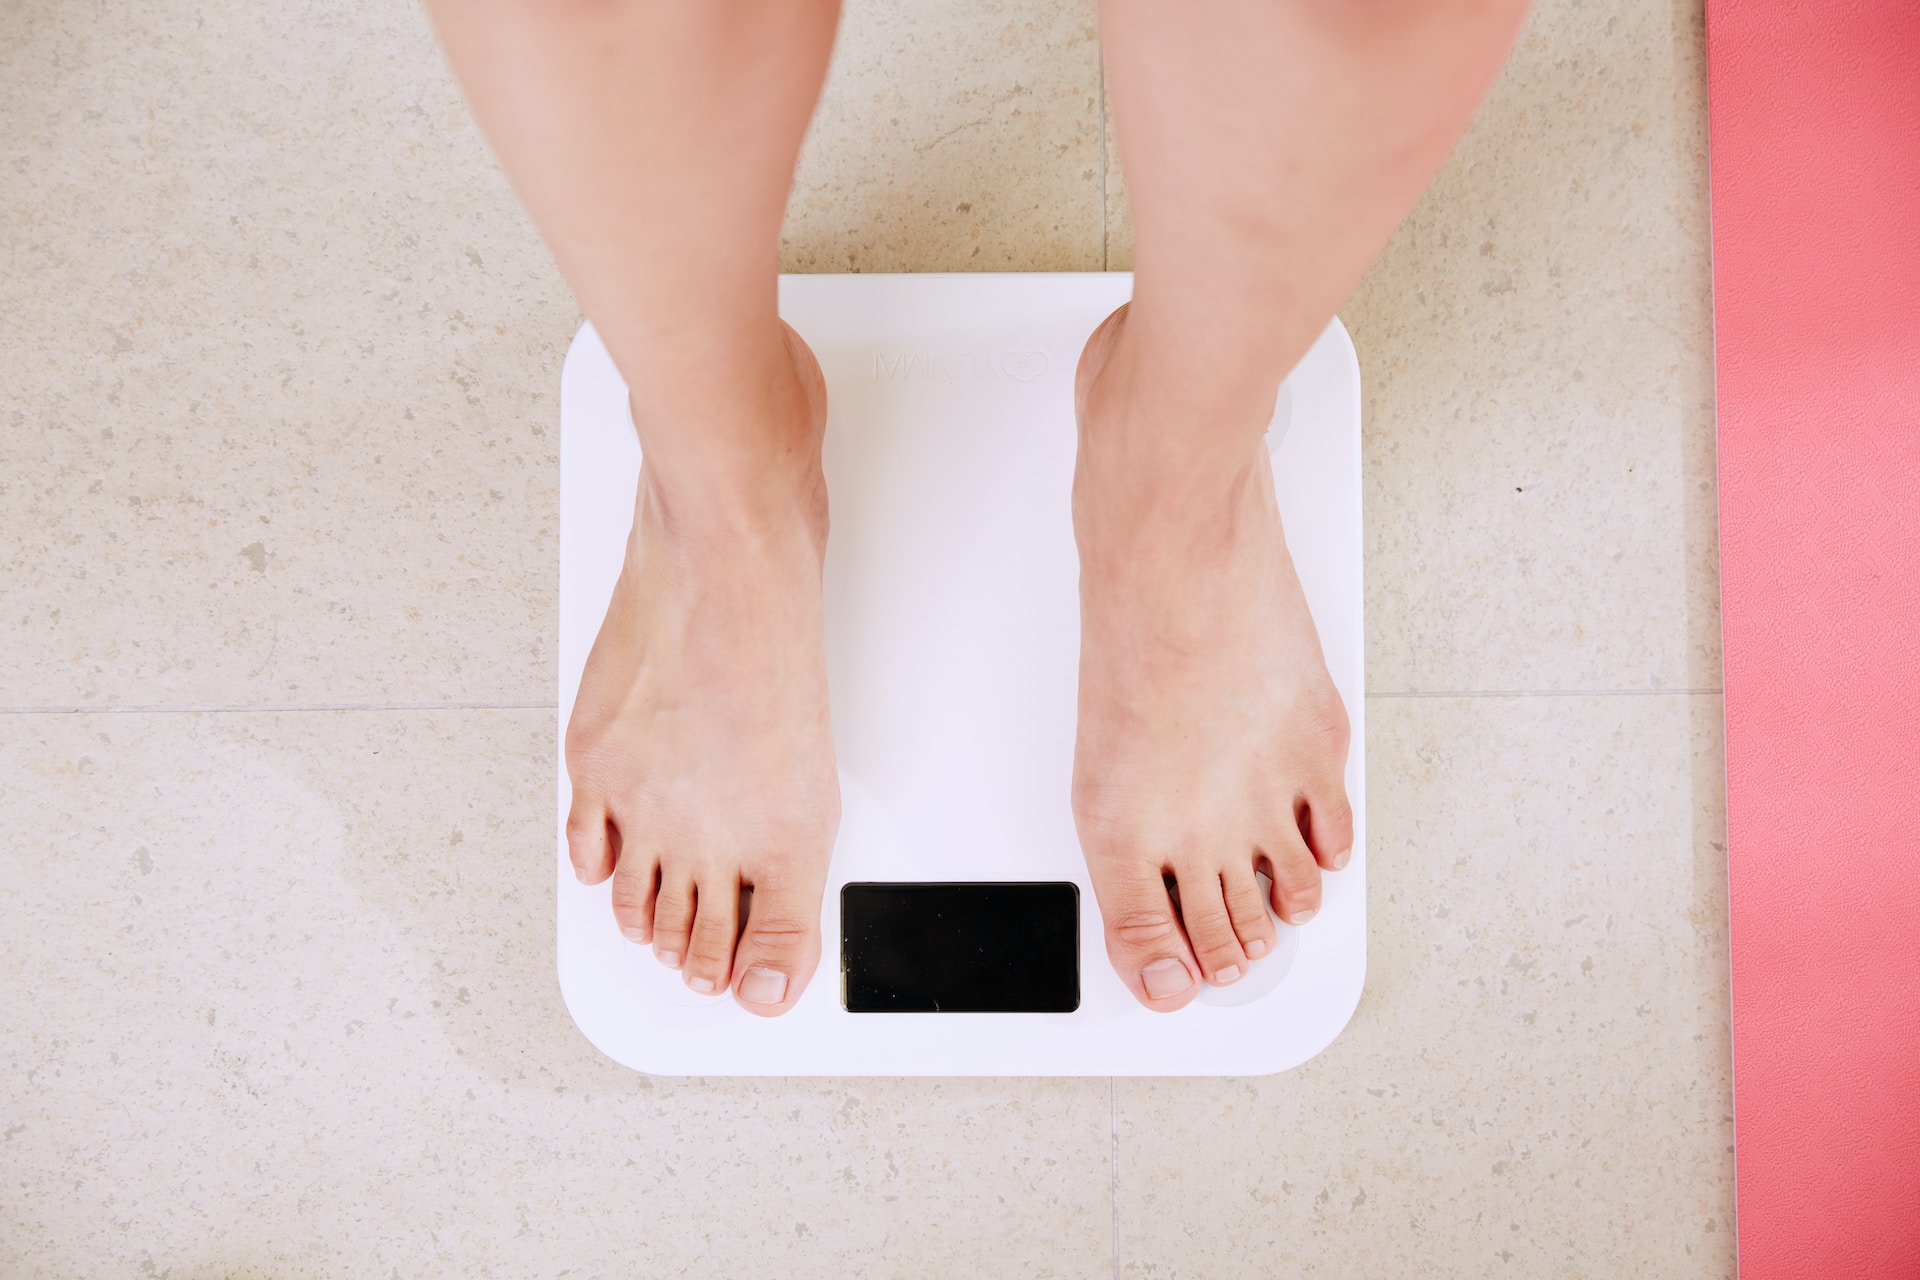 Discover the common causes of unhealthy weight loss, from crash diets to eating disorders. Learn why a sustainable approach is crucial for overall well-being.